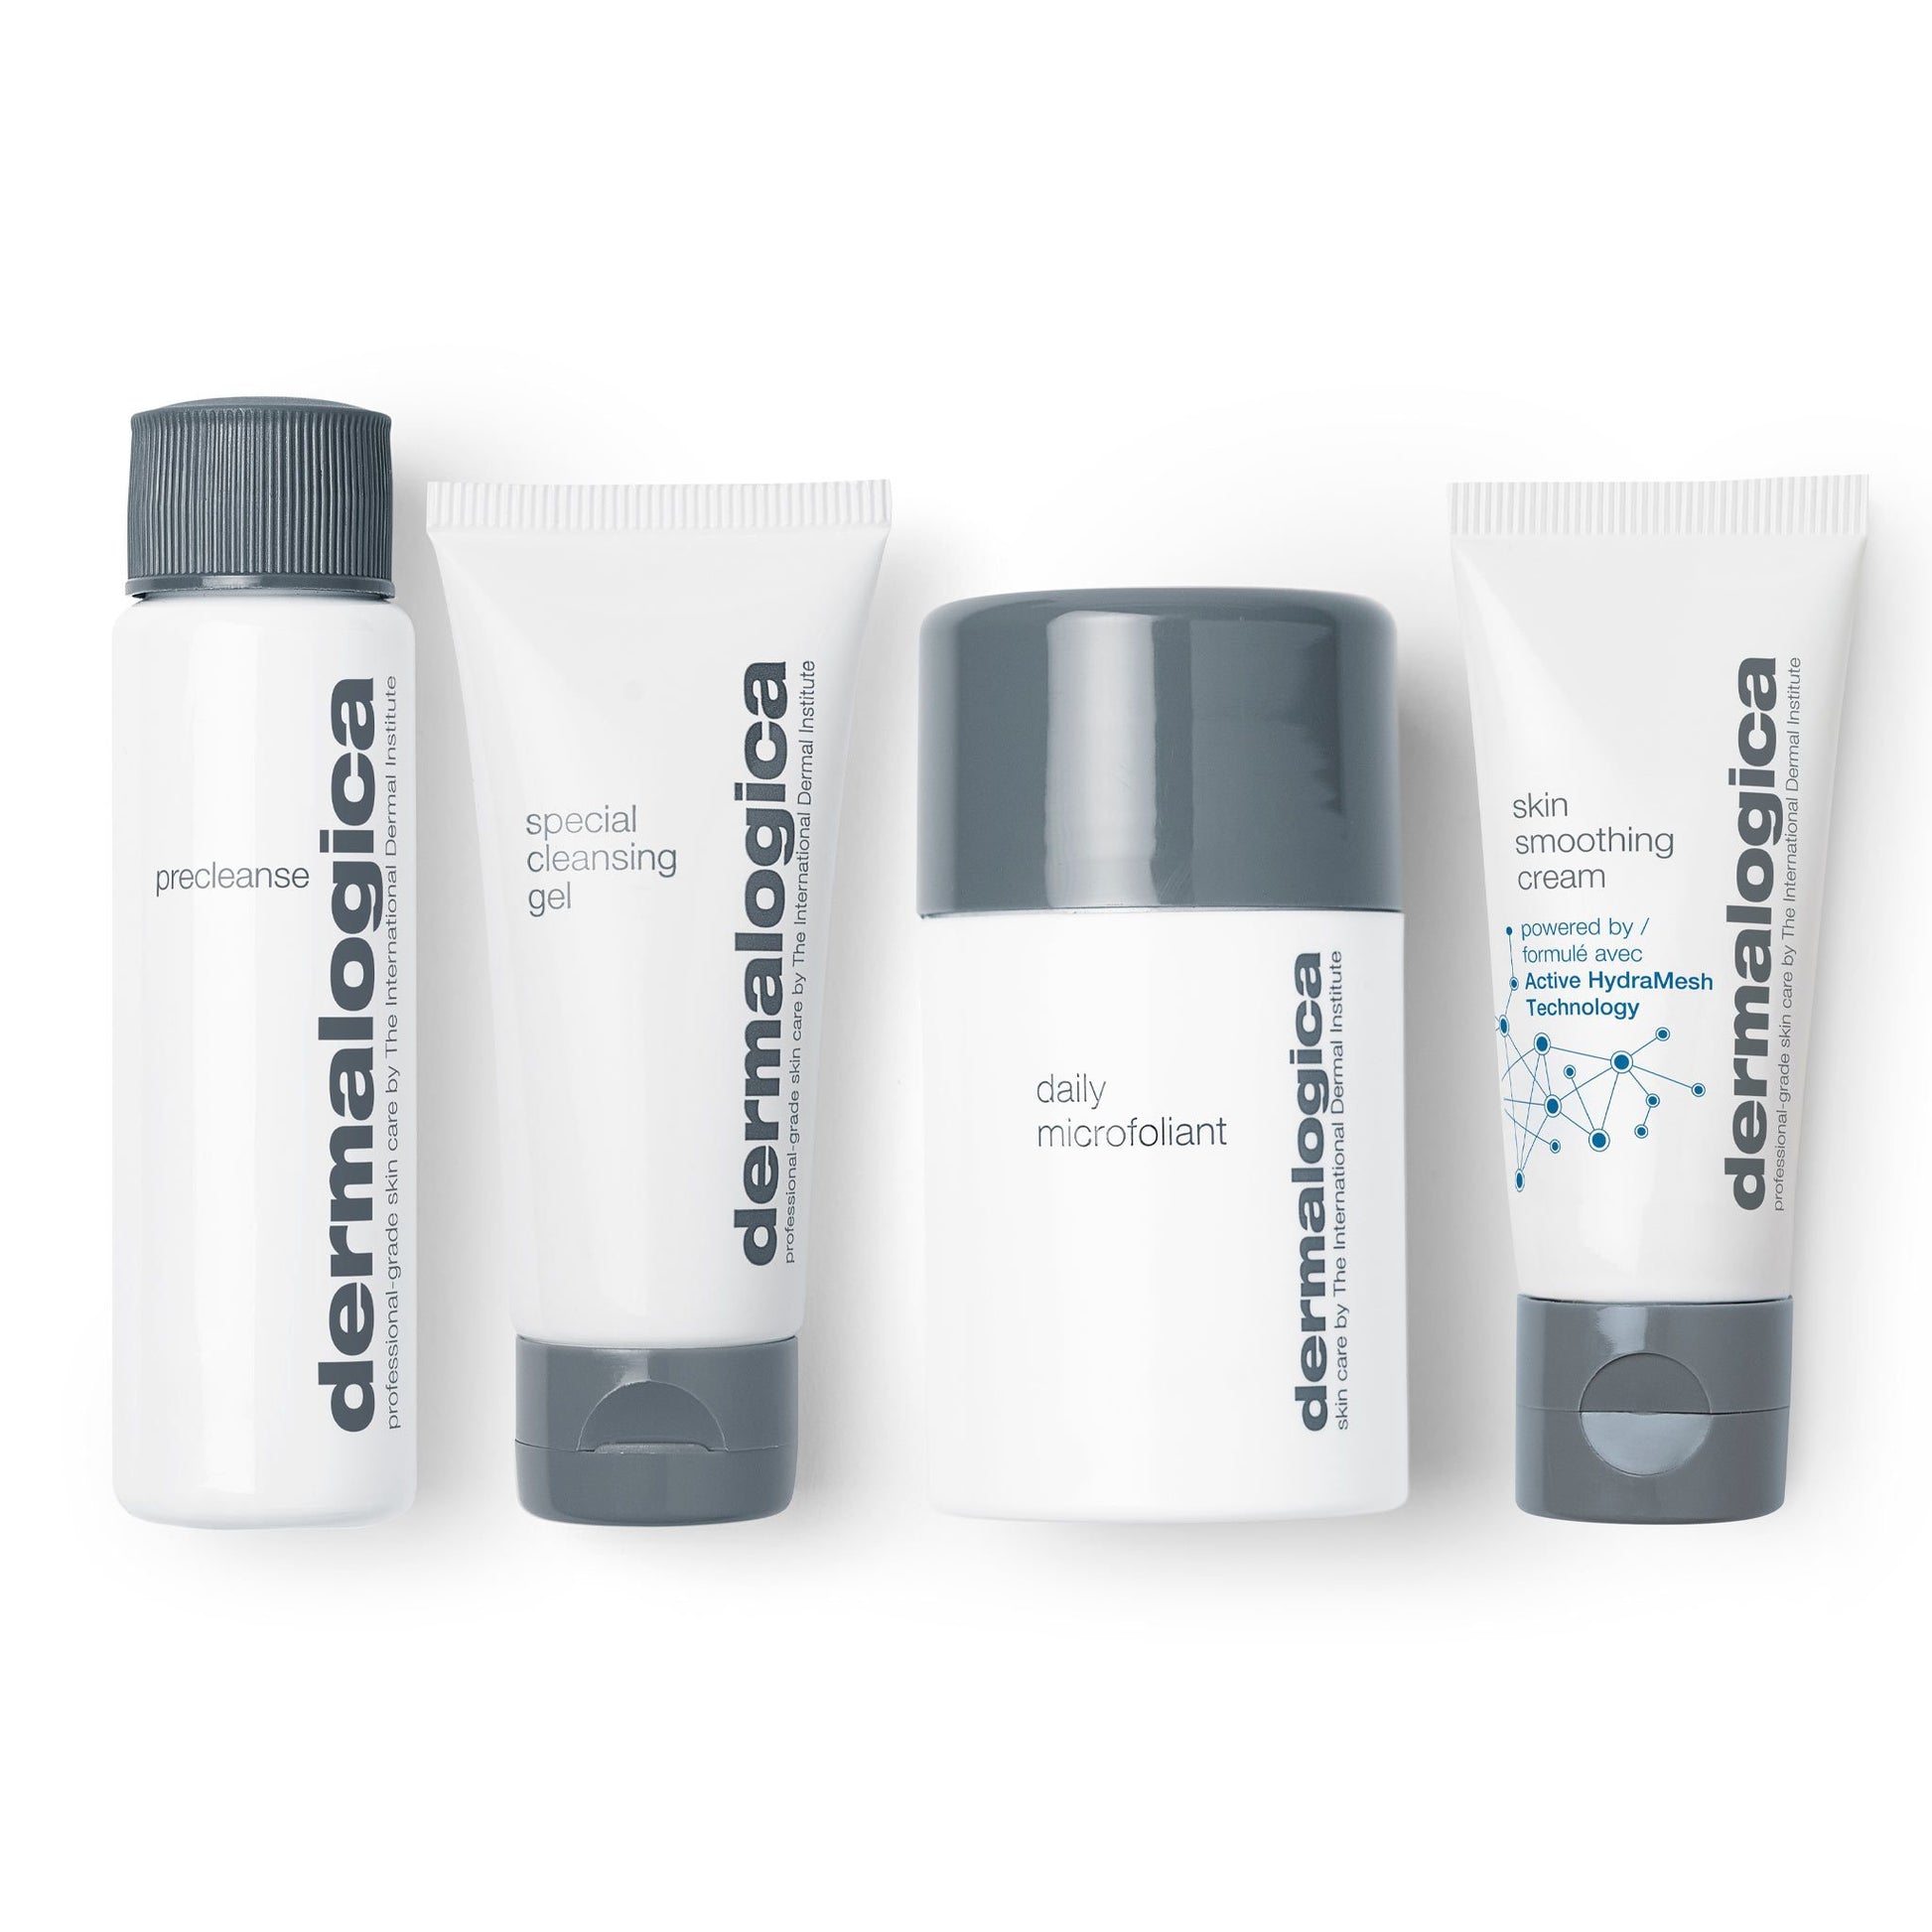 dermalogica skin kits and sets each discover healthy skin kit